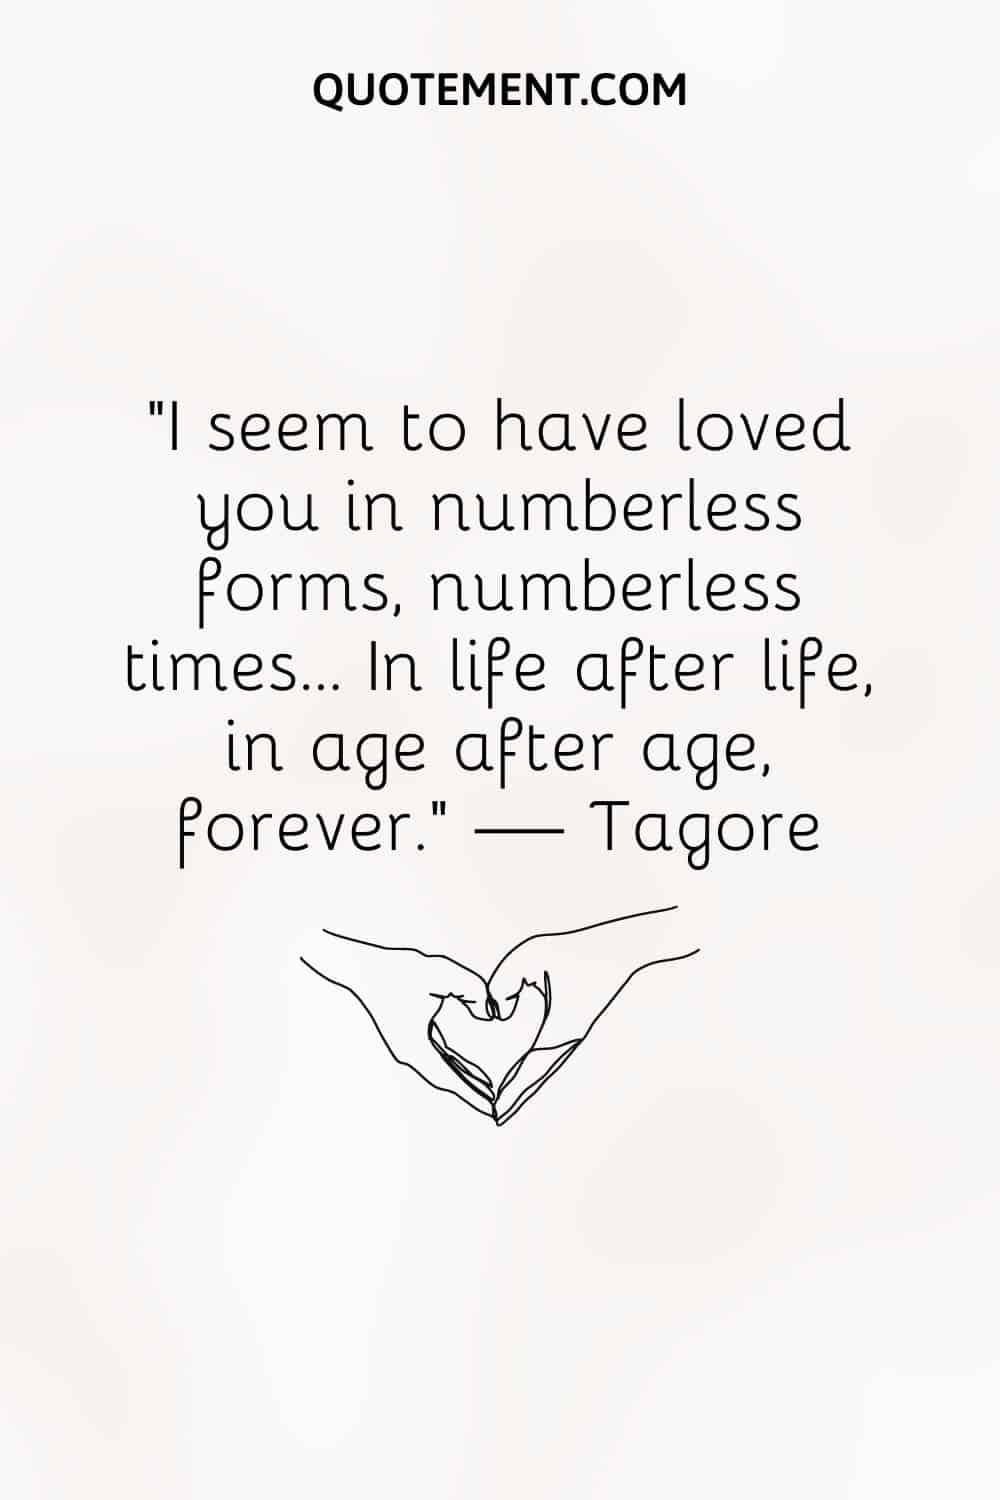 I seem to have loved you in numberless forms, numberless times… In life after life, in age after age, forever